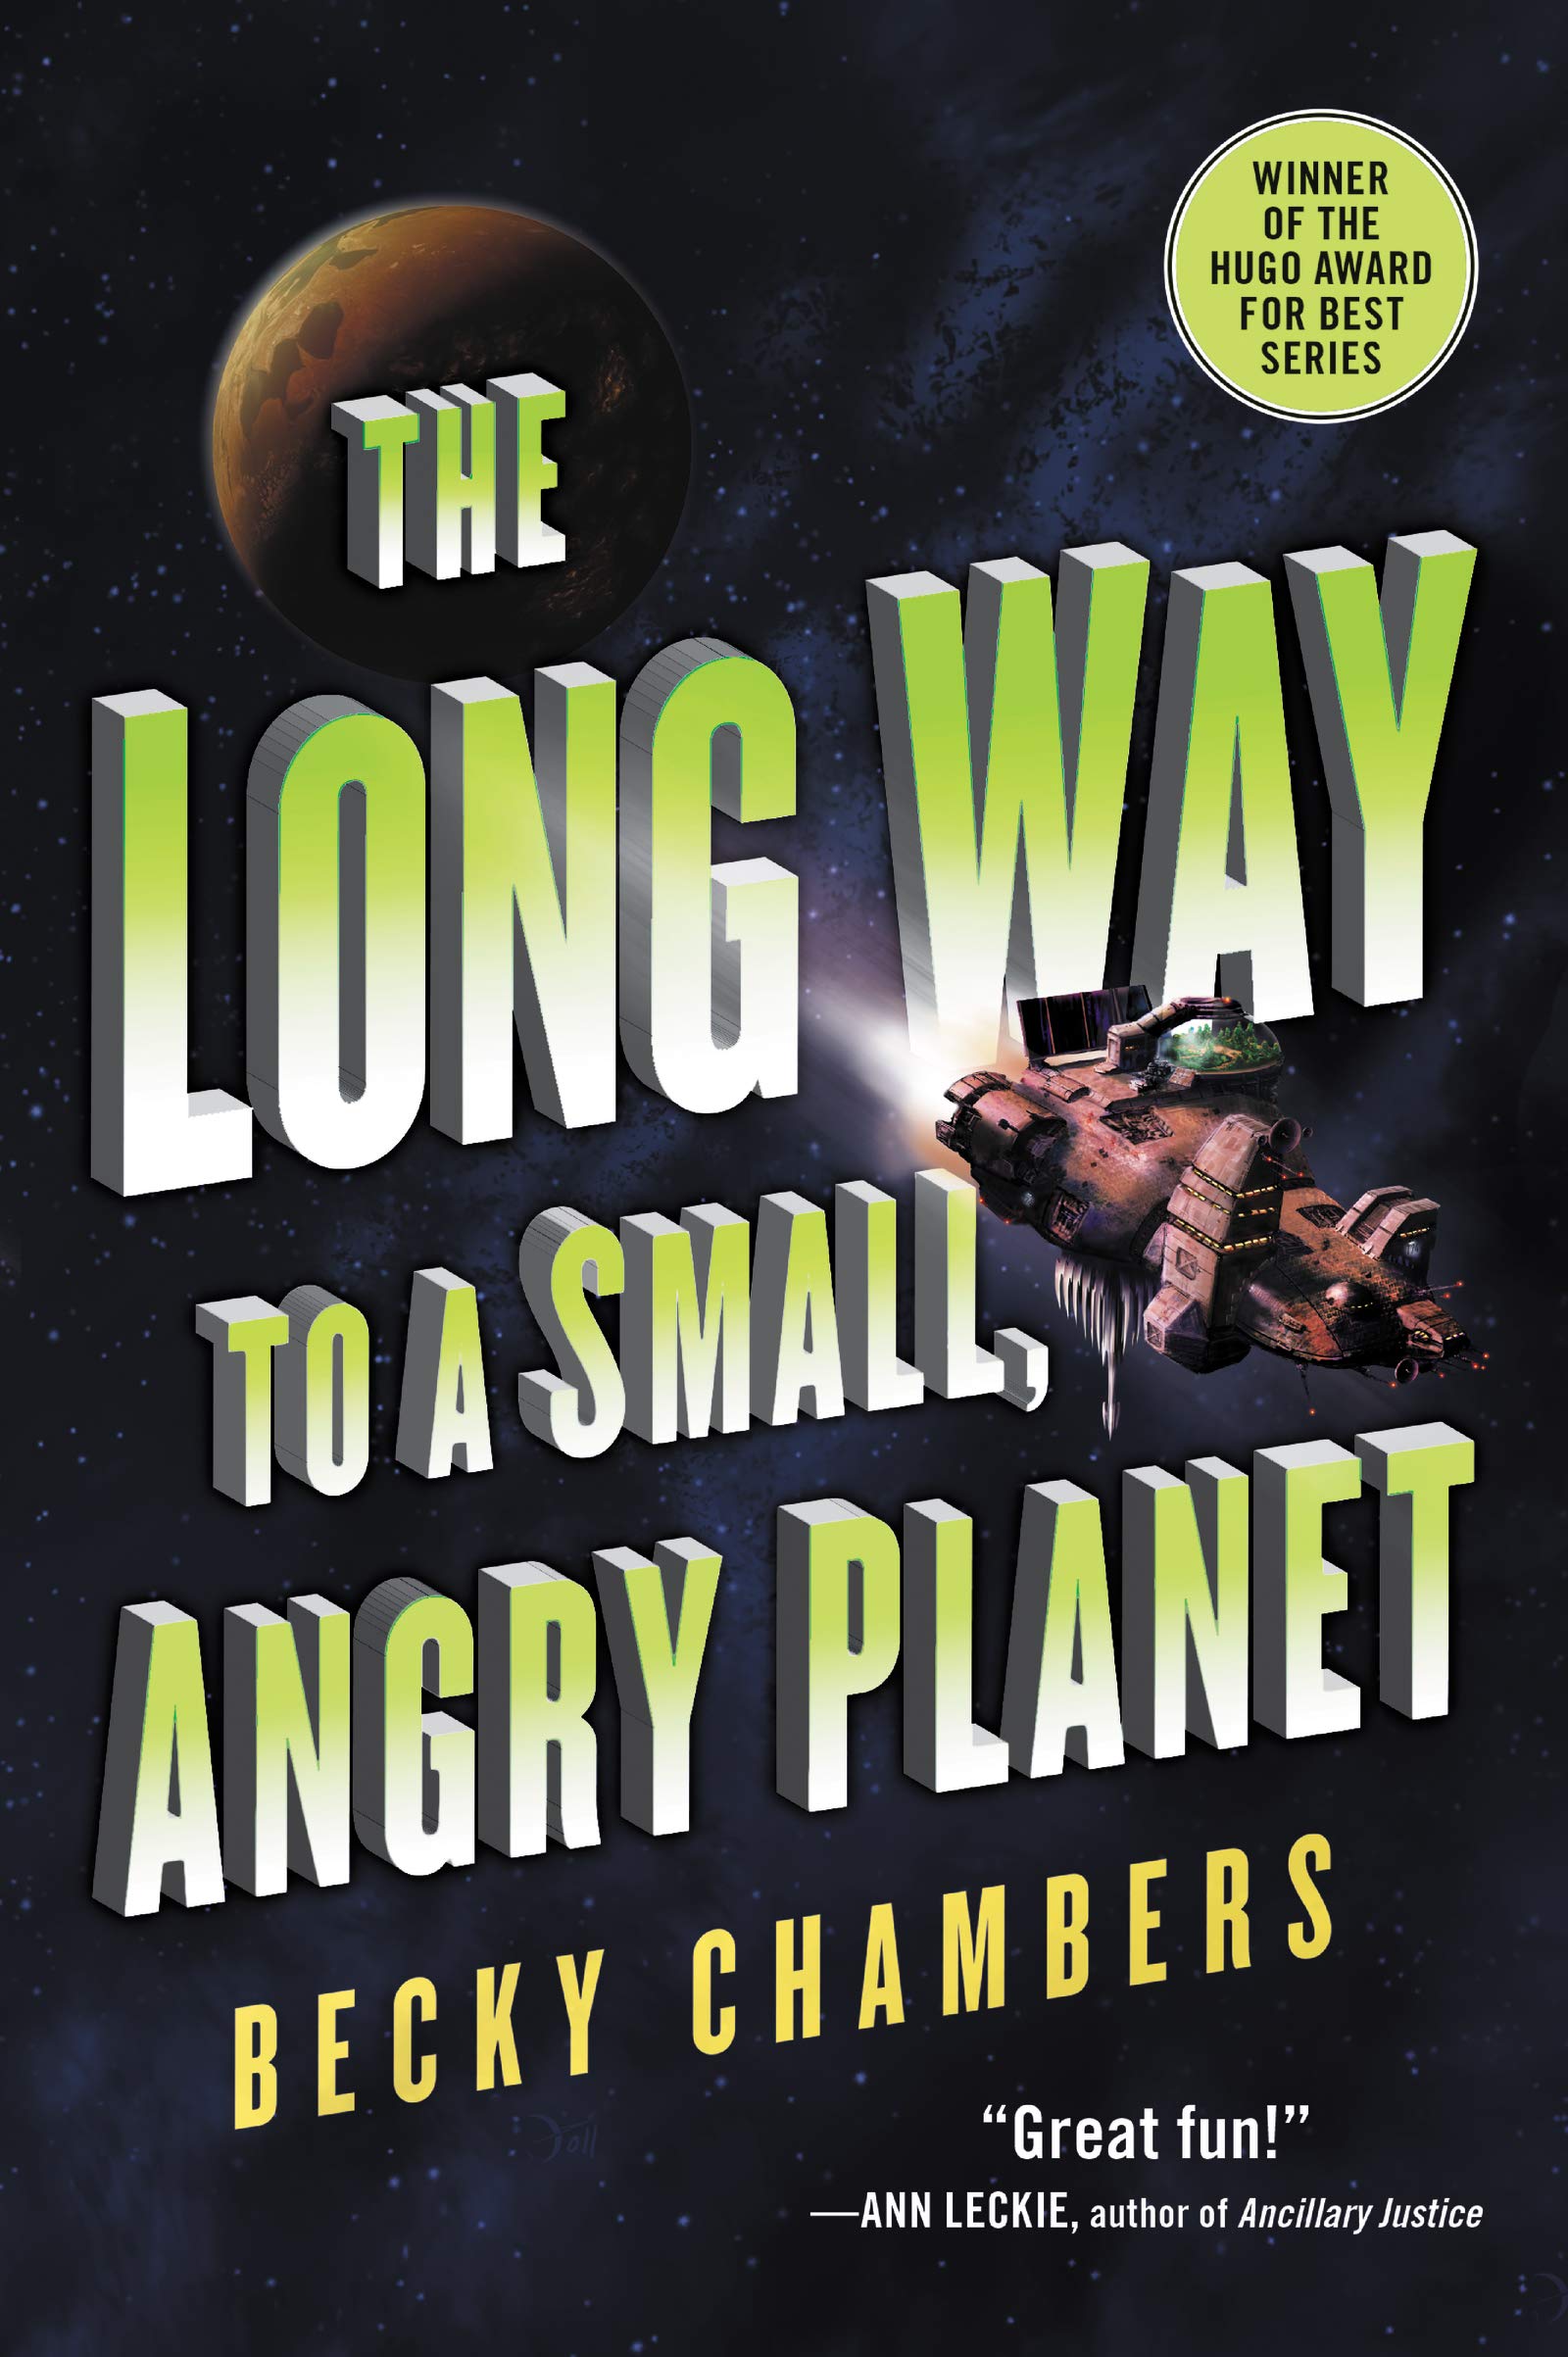 The Long Way to a Small, Angry Planet (Wayfarers Book 1)